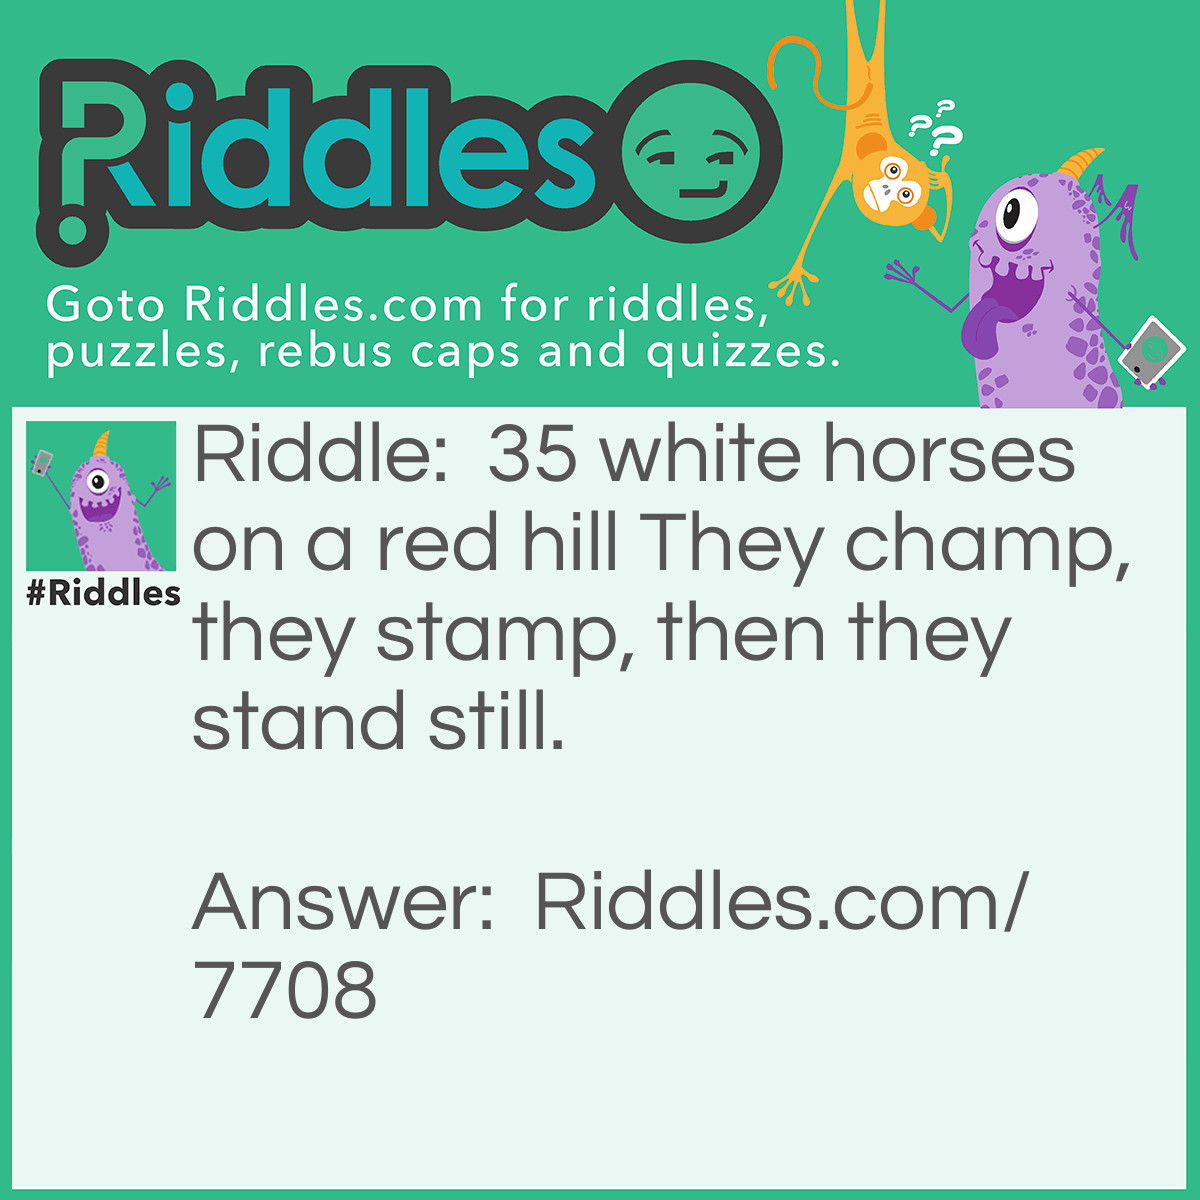 Riddle: 35 white horses on a red hill They champ, they stamp, then they stand still. Answer: Teeth.